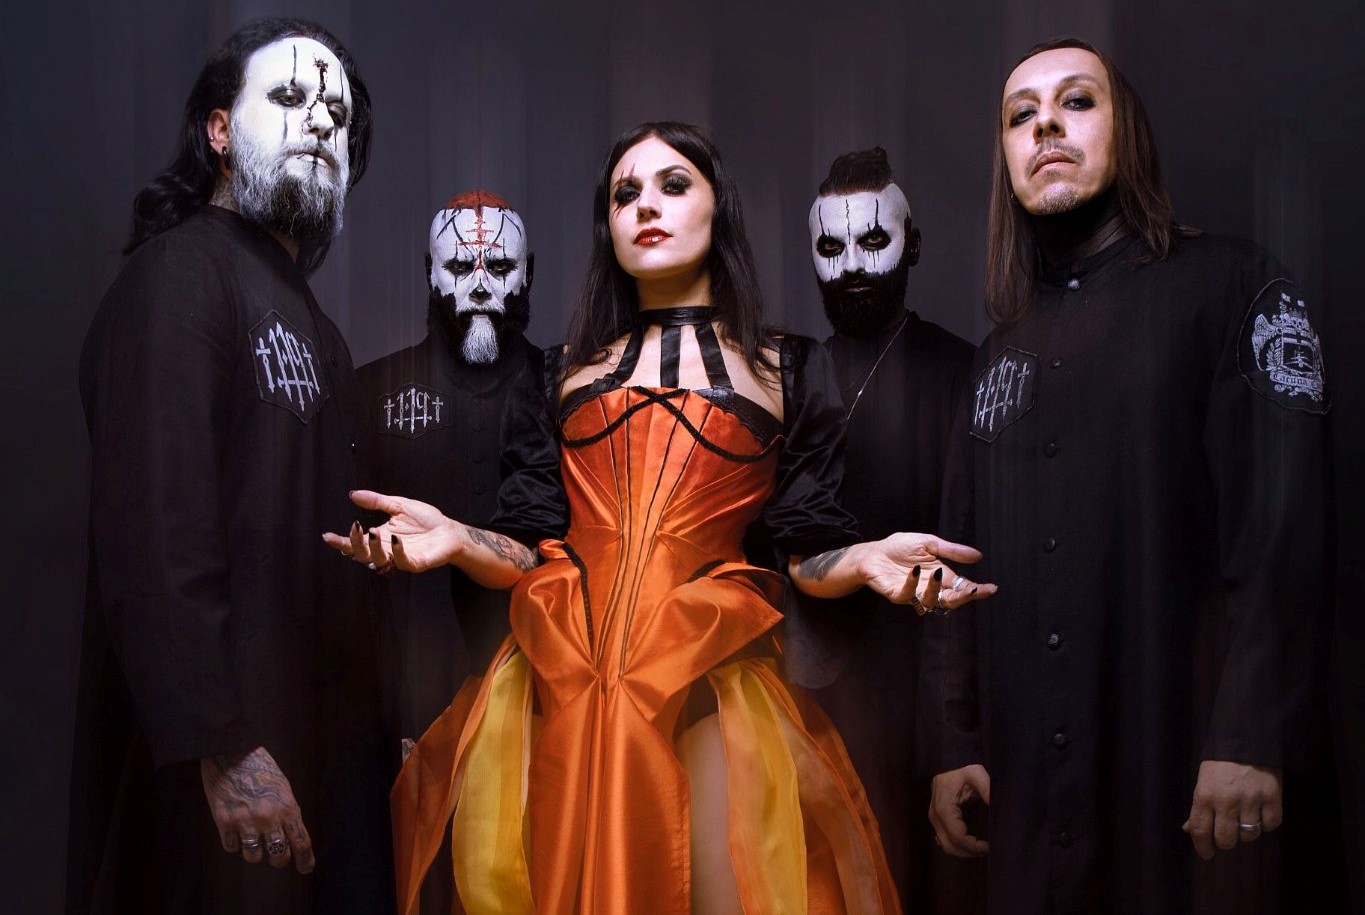 LACUNA COIL release music video for new version of “Tight Rope” from “Comalies XX” album.